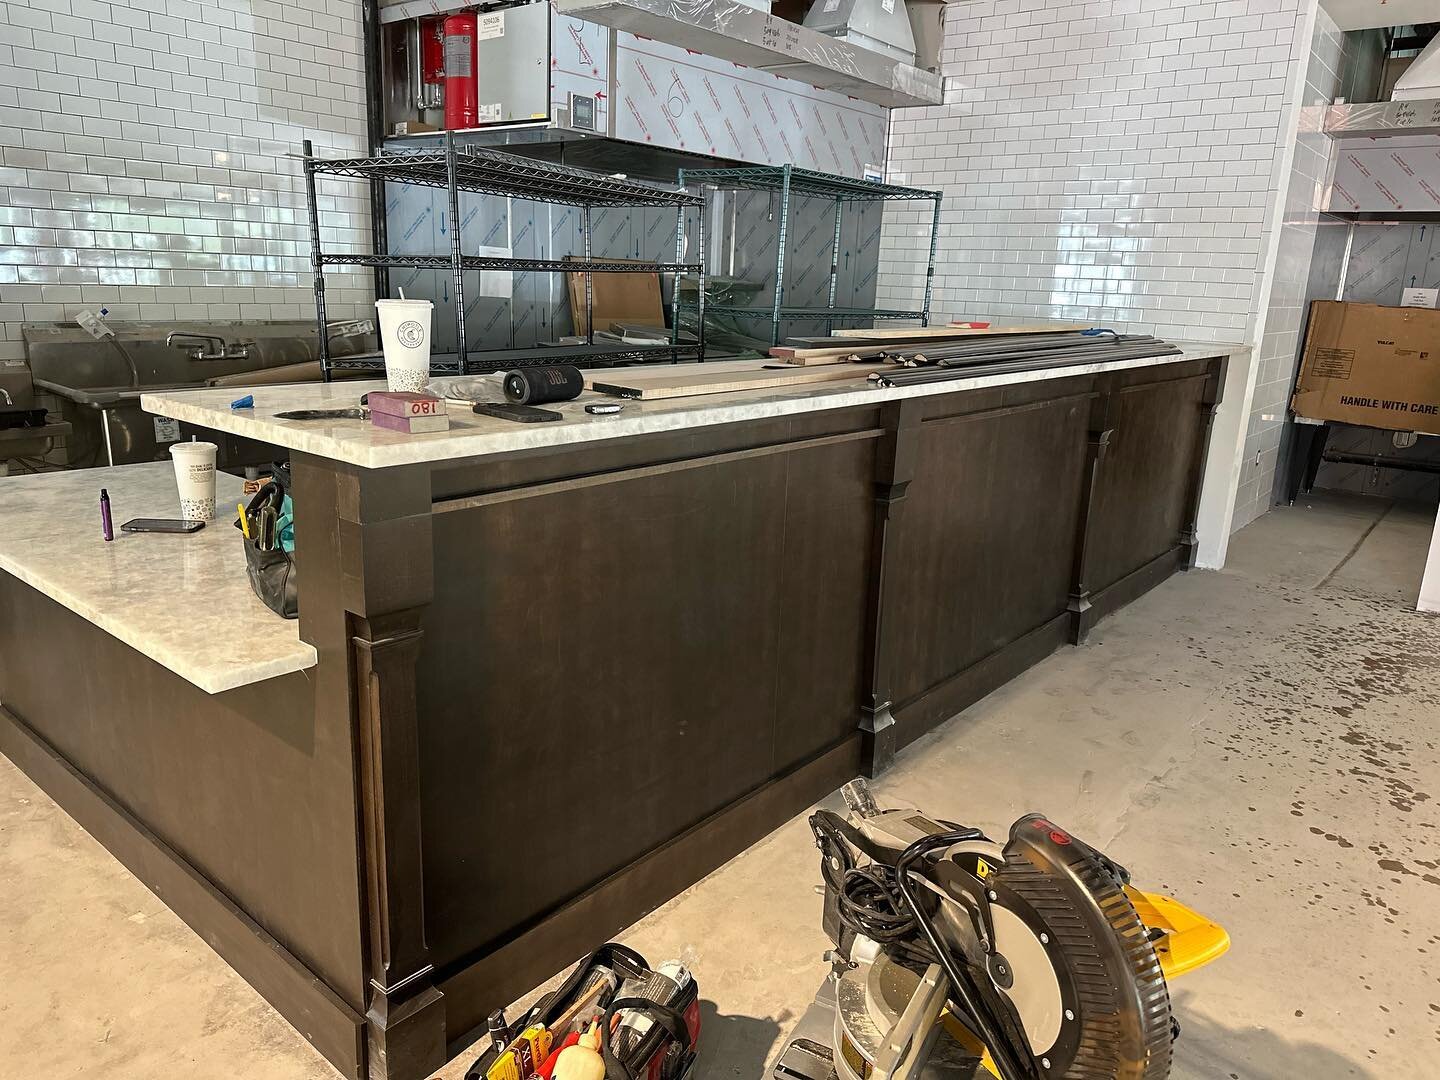 Our booth in midtown is coming together beautifully! Can&rsquo;t wait for the finishing touches. 🍔 Coming soon to Conservatory Midtown | 606 Dennis St.